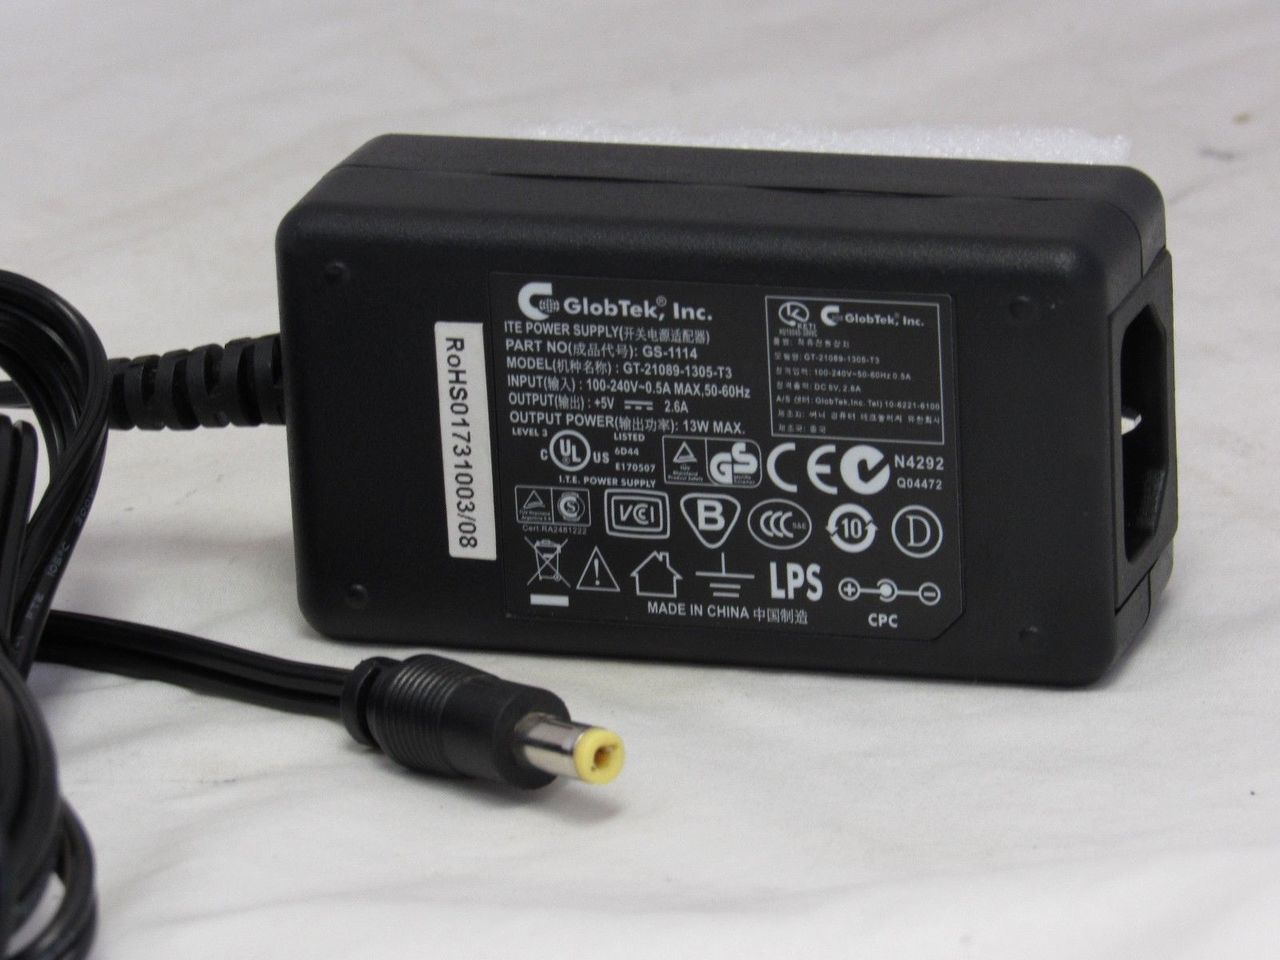 New 5V 2.6A GlobTek ITE GS-1114 GT-21089-1305-T3 AC Adapter Power supply - Click Image to Close